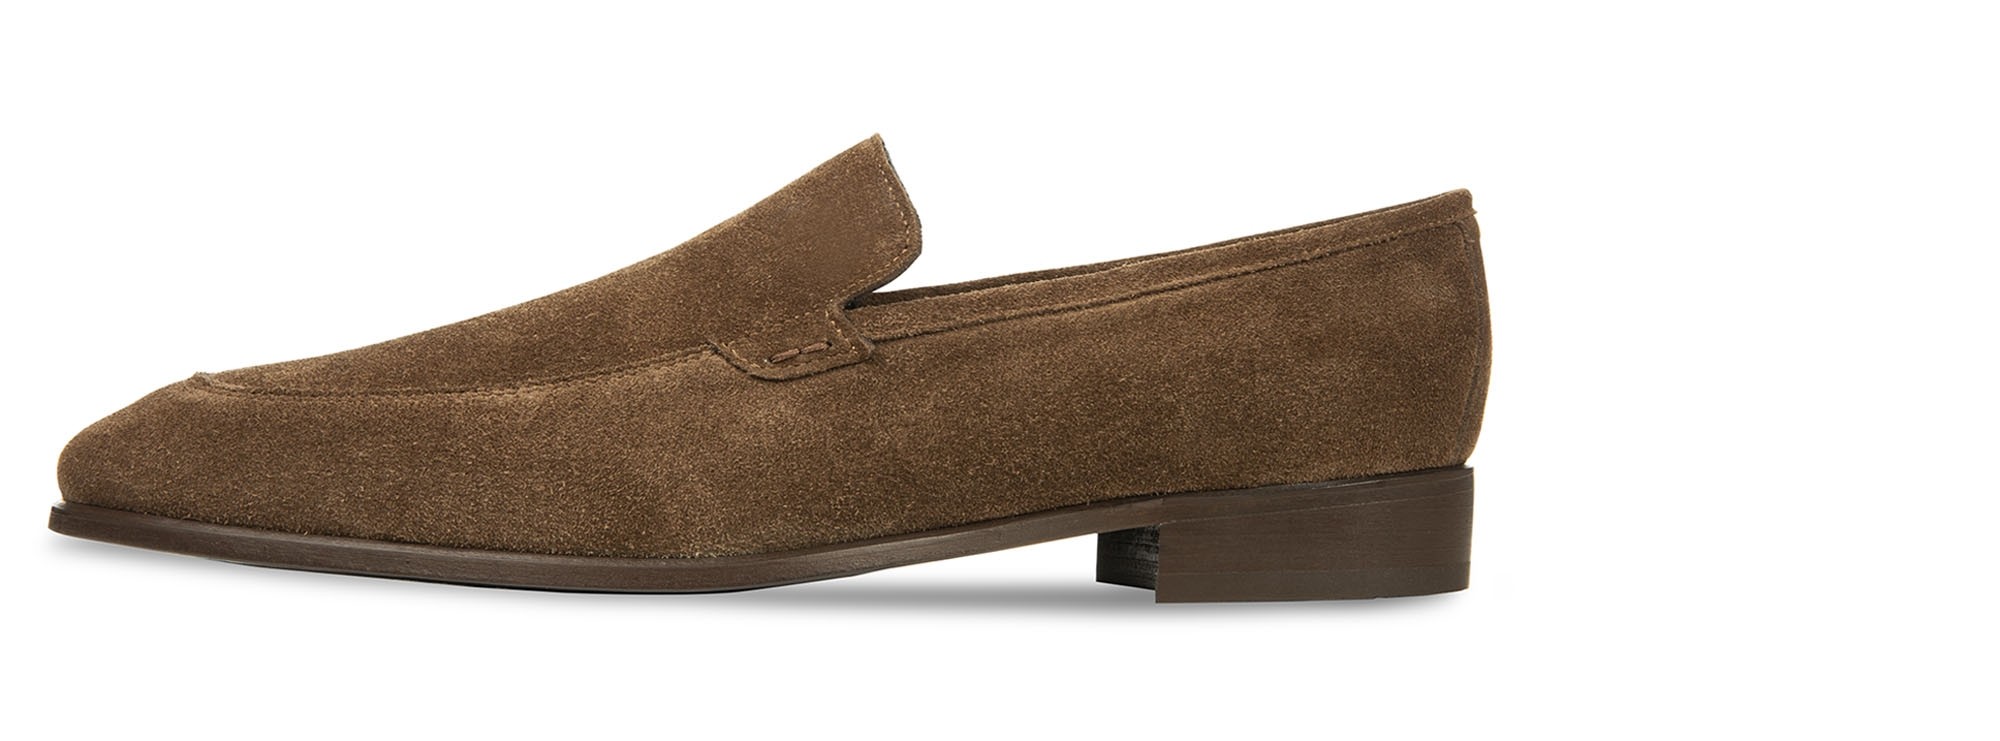 Stelvio - Elevator Loafers in Suede Leather up to 2.6 inches